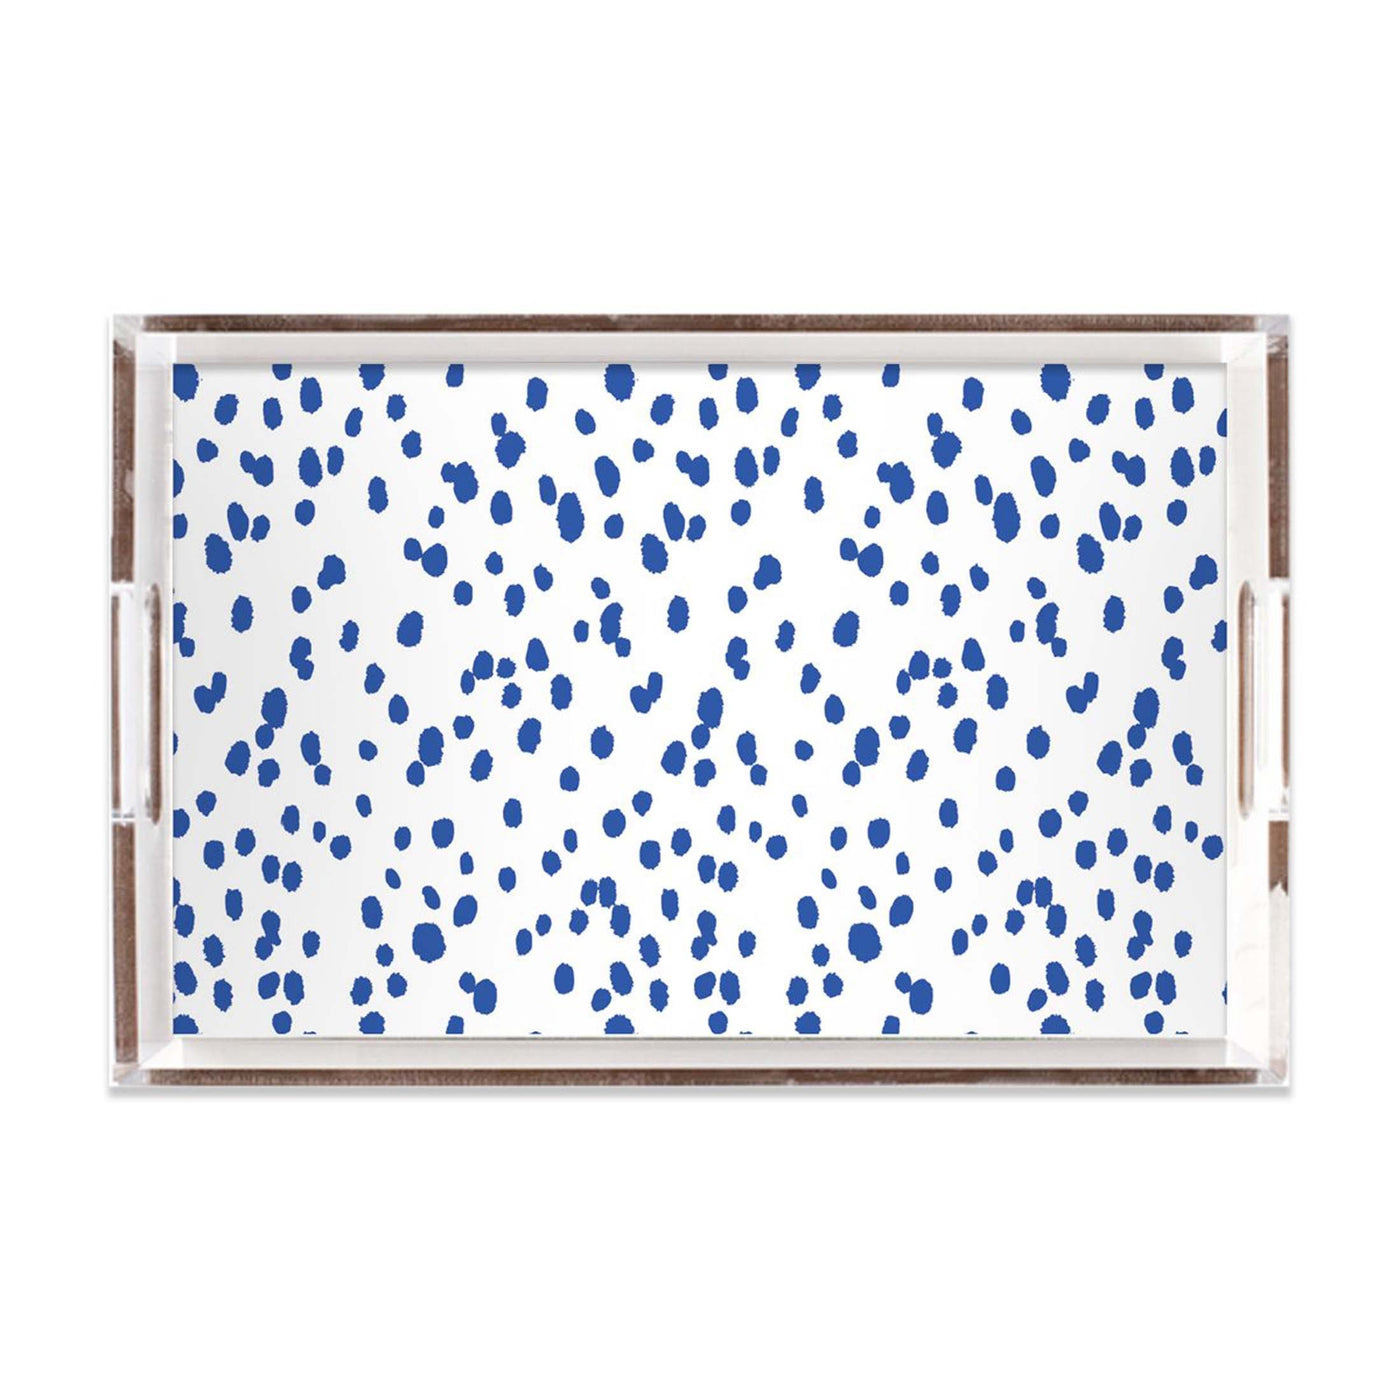 Lucite Trays Blue / 11x17 Seeing Spots Lucite Tray Katie Kime